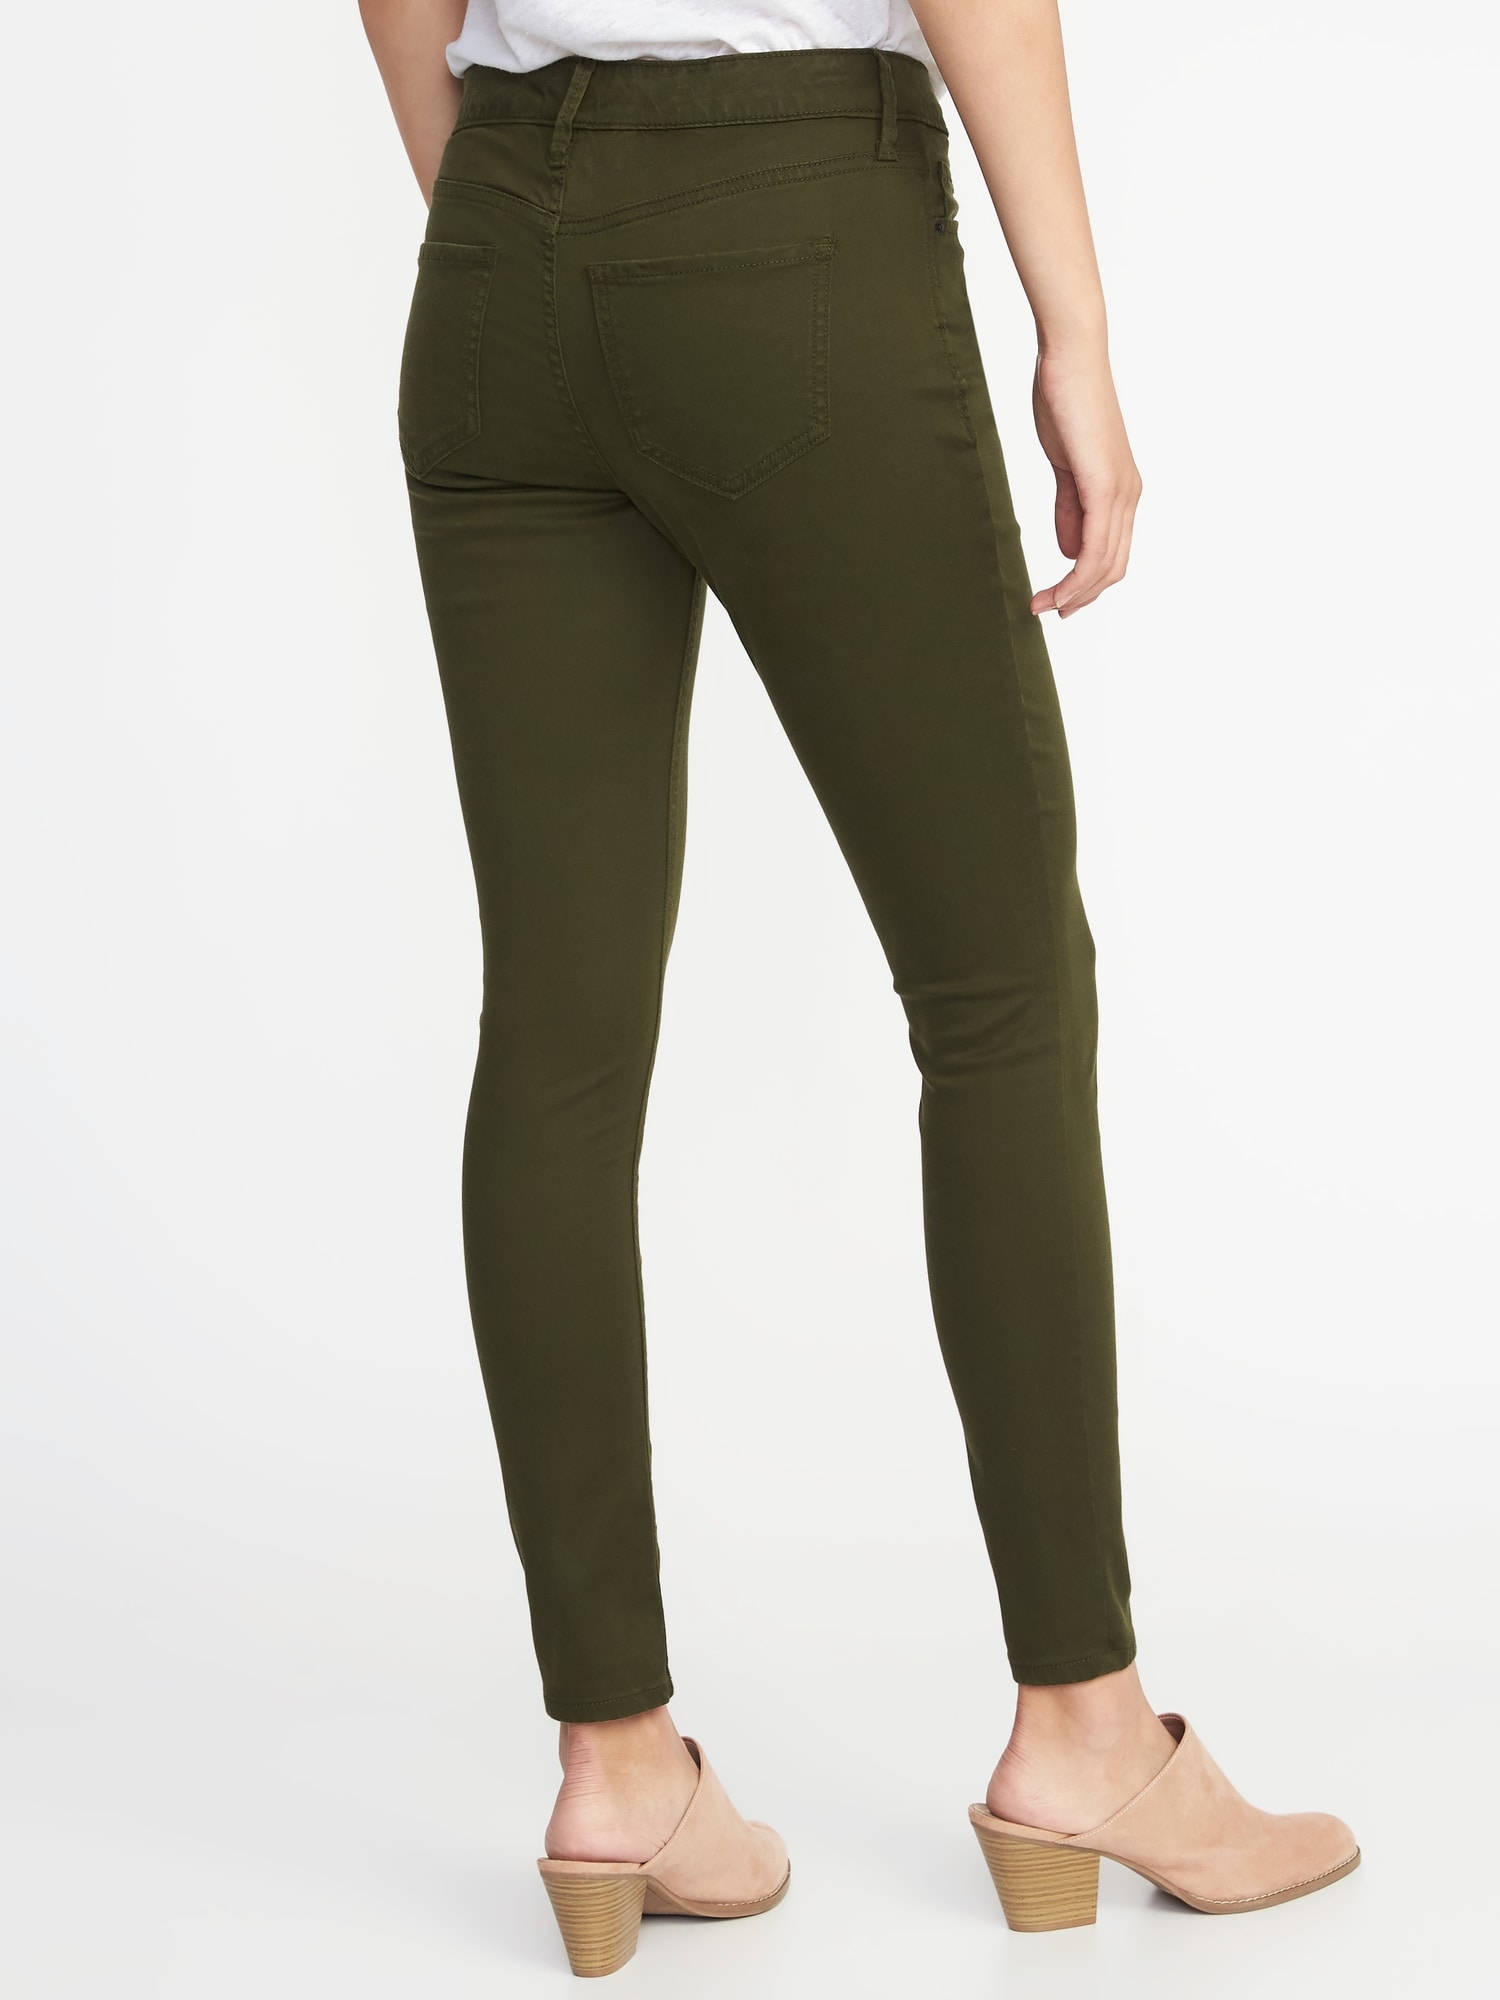 Mid-Rise Sateen Rockstar Super Skinny Jeans for Women | Old Navy